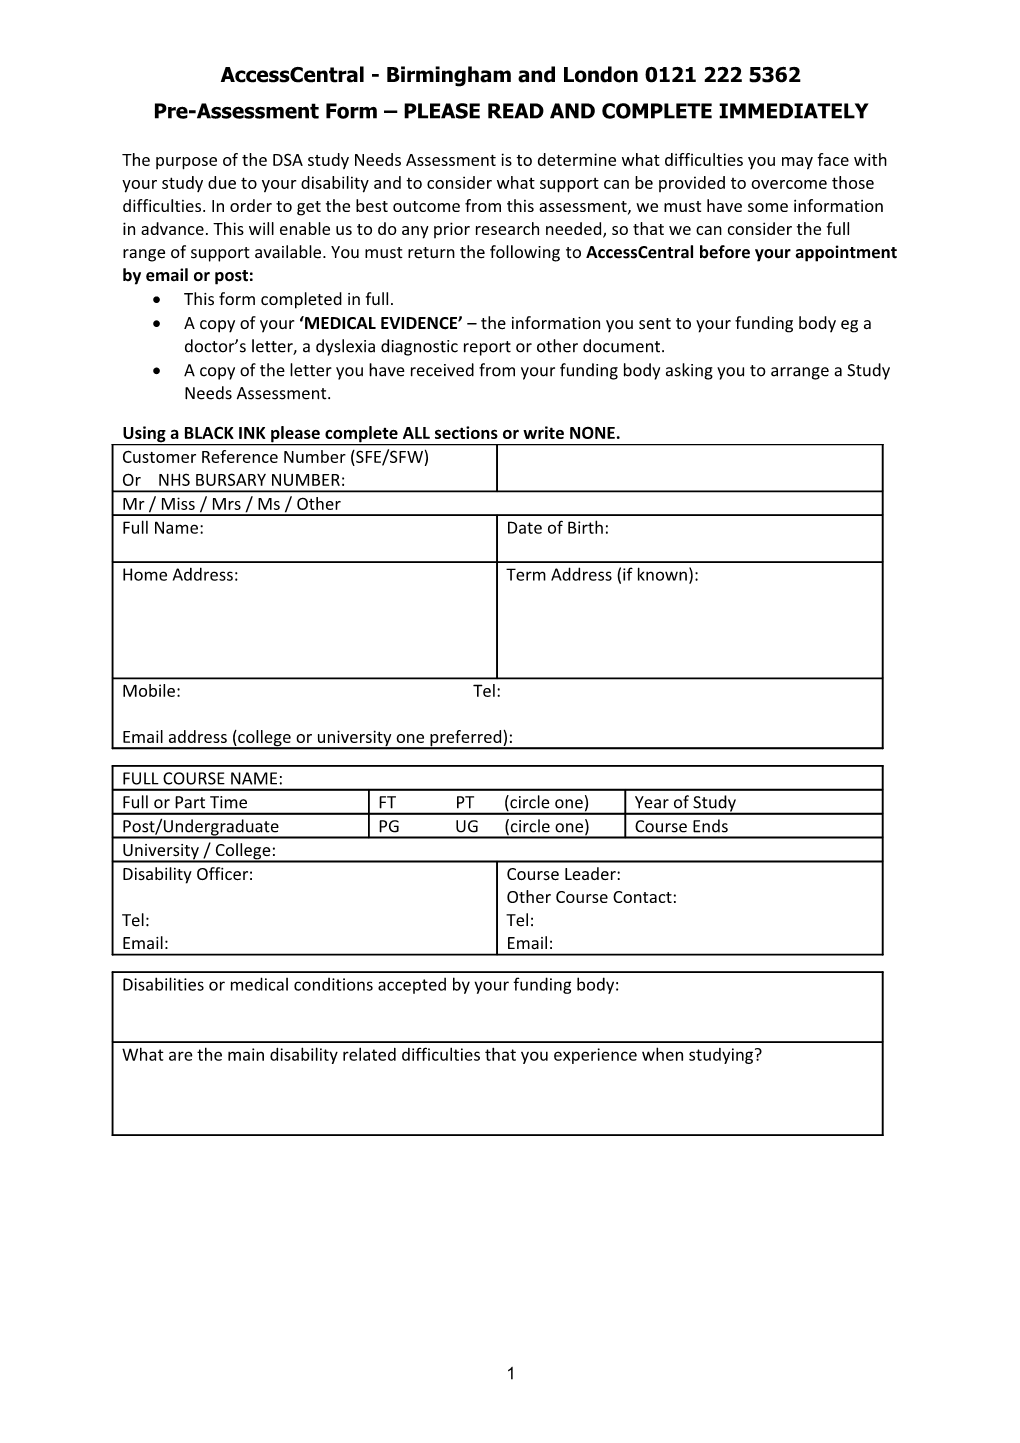 Template 1: Pre-Assessment Form